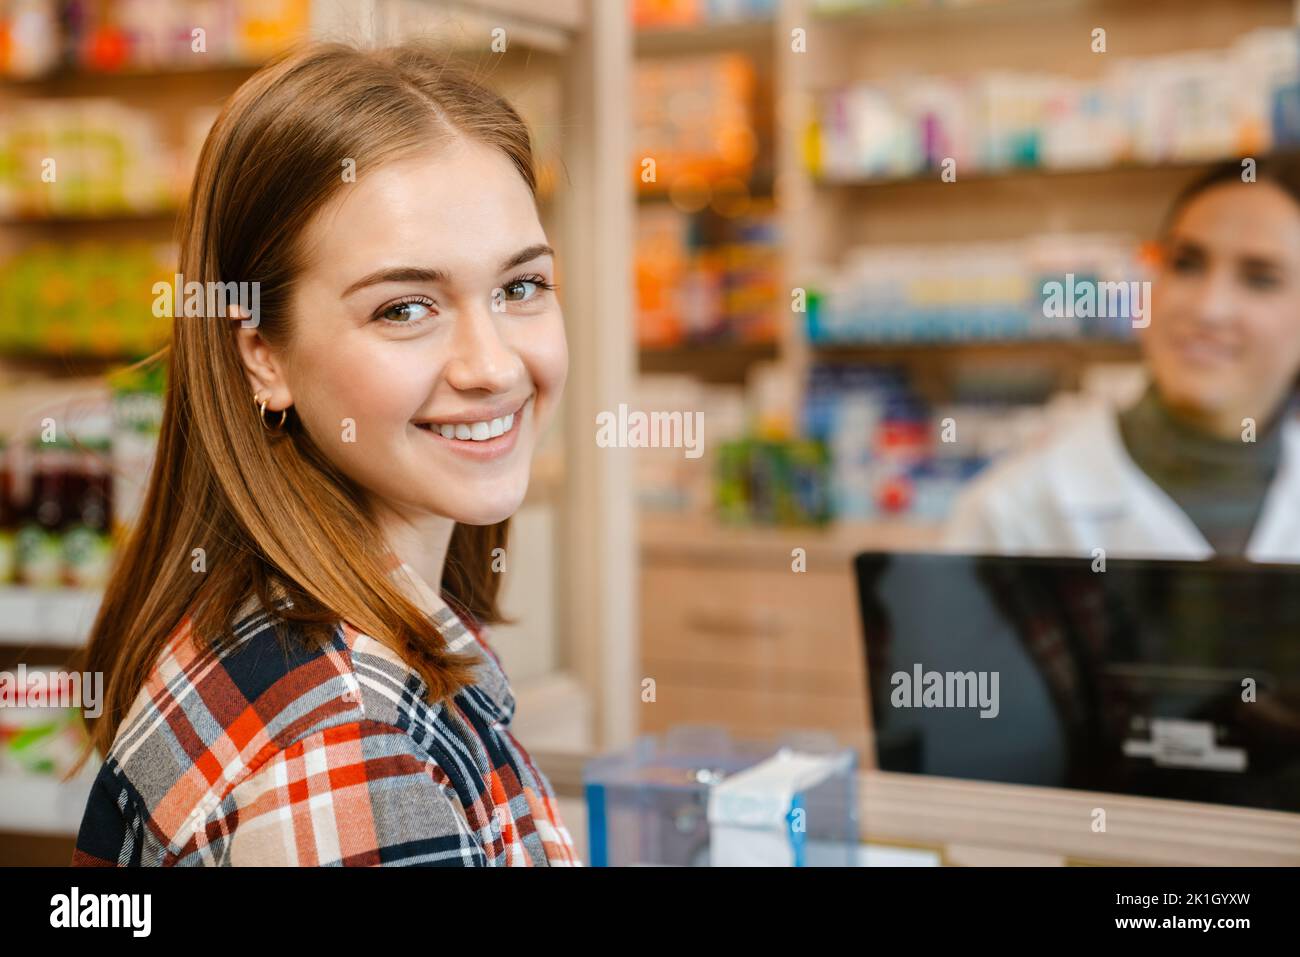 White ginger woman smiling while buying medicine in pharmacy indoors Stock Photo